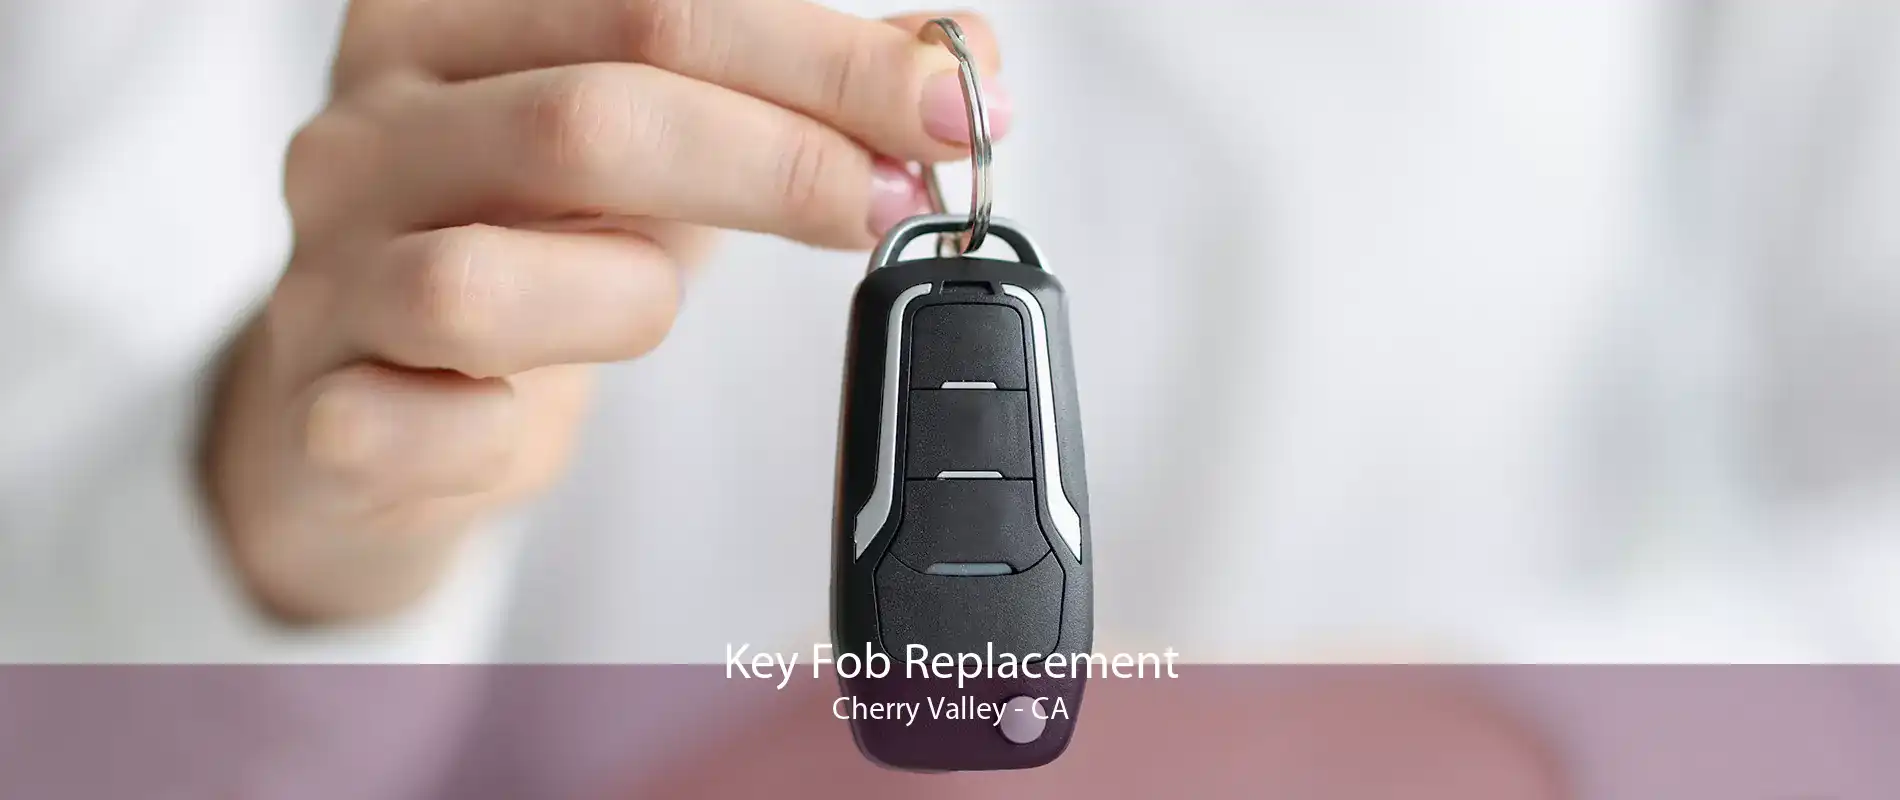 Key Fob Replacement Cherry Valley - CA